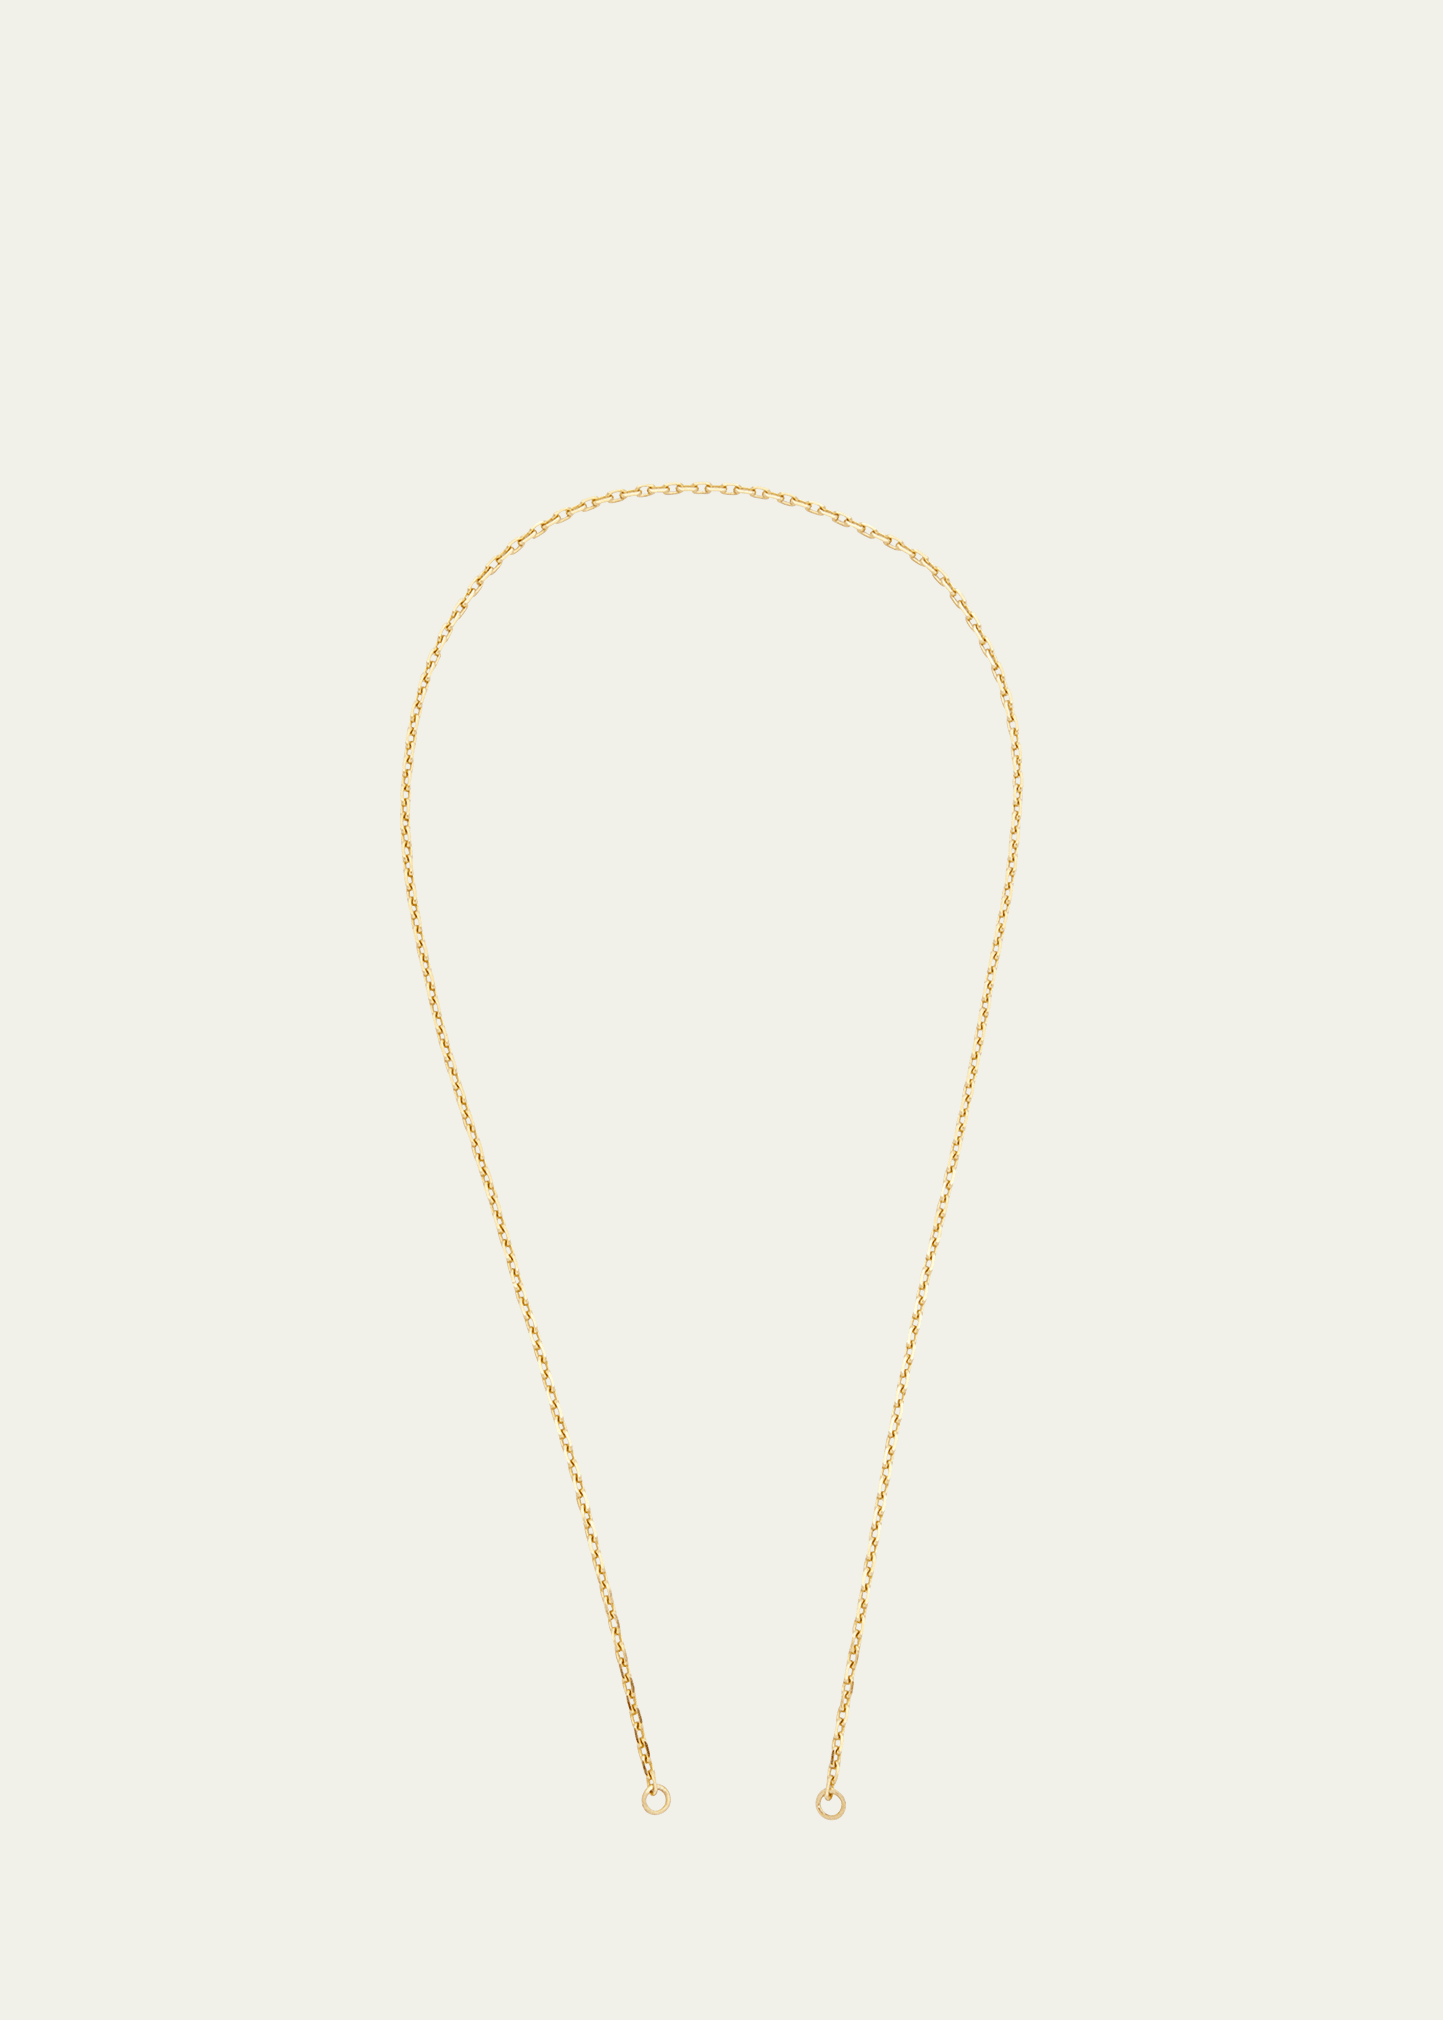 Anchor Chain With Solid 18k Yellow Gold, 20"L